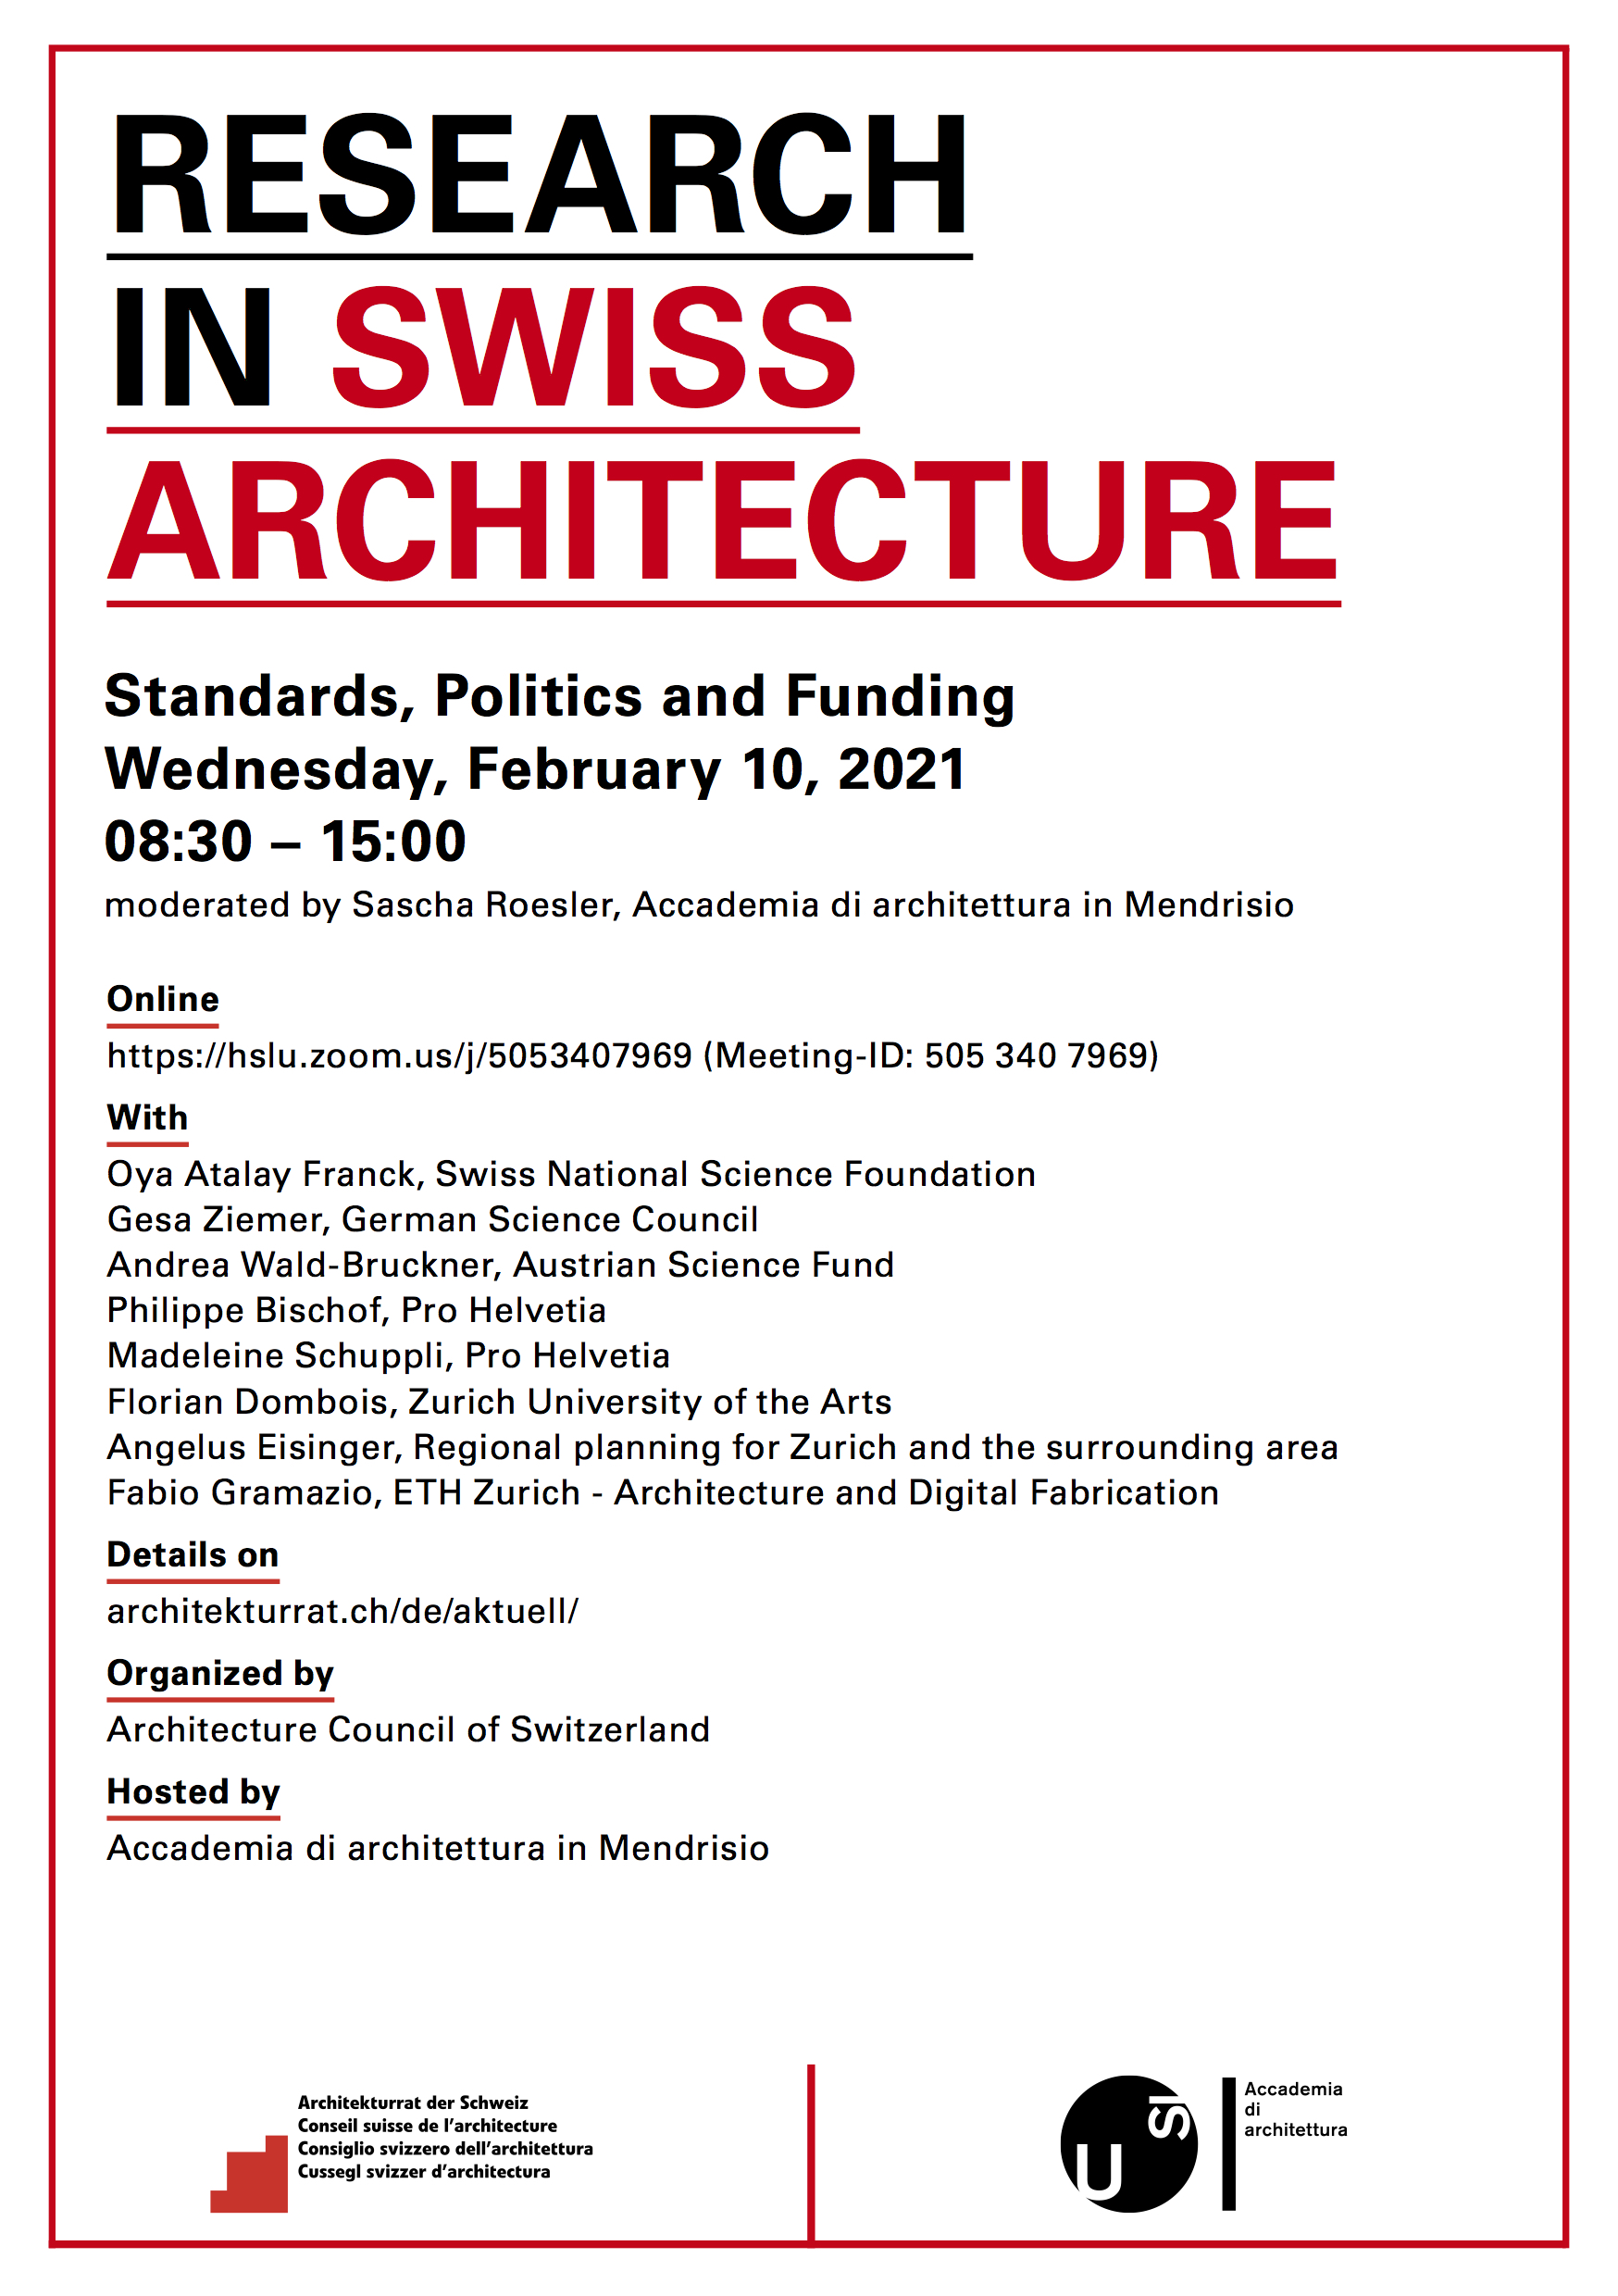 Symposium on research in Swiss architecture, moderated by Sascha Roesler